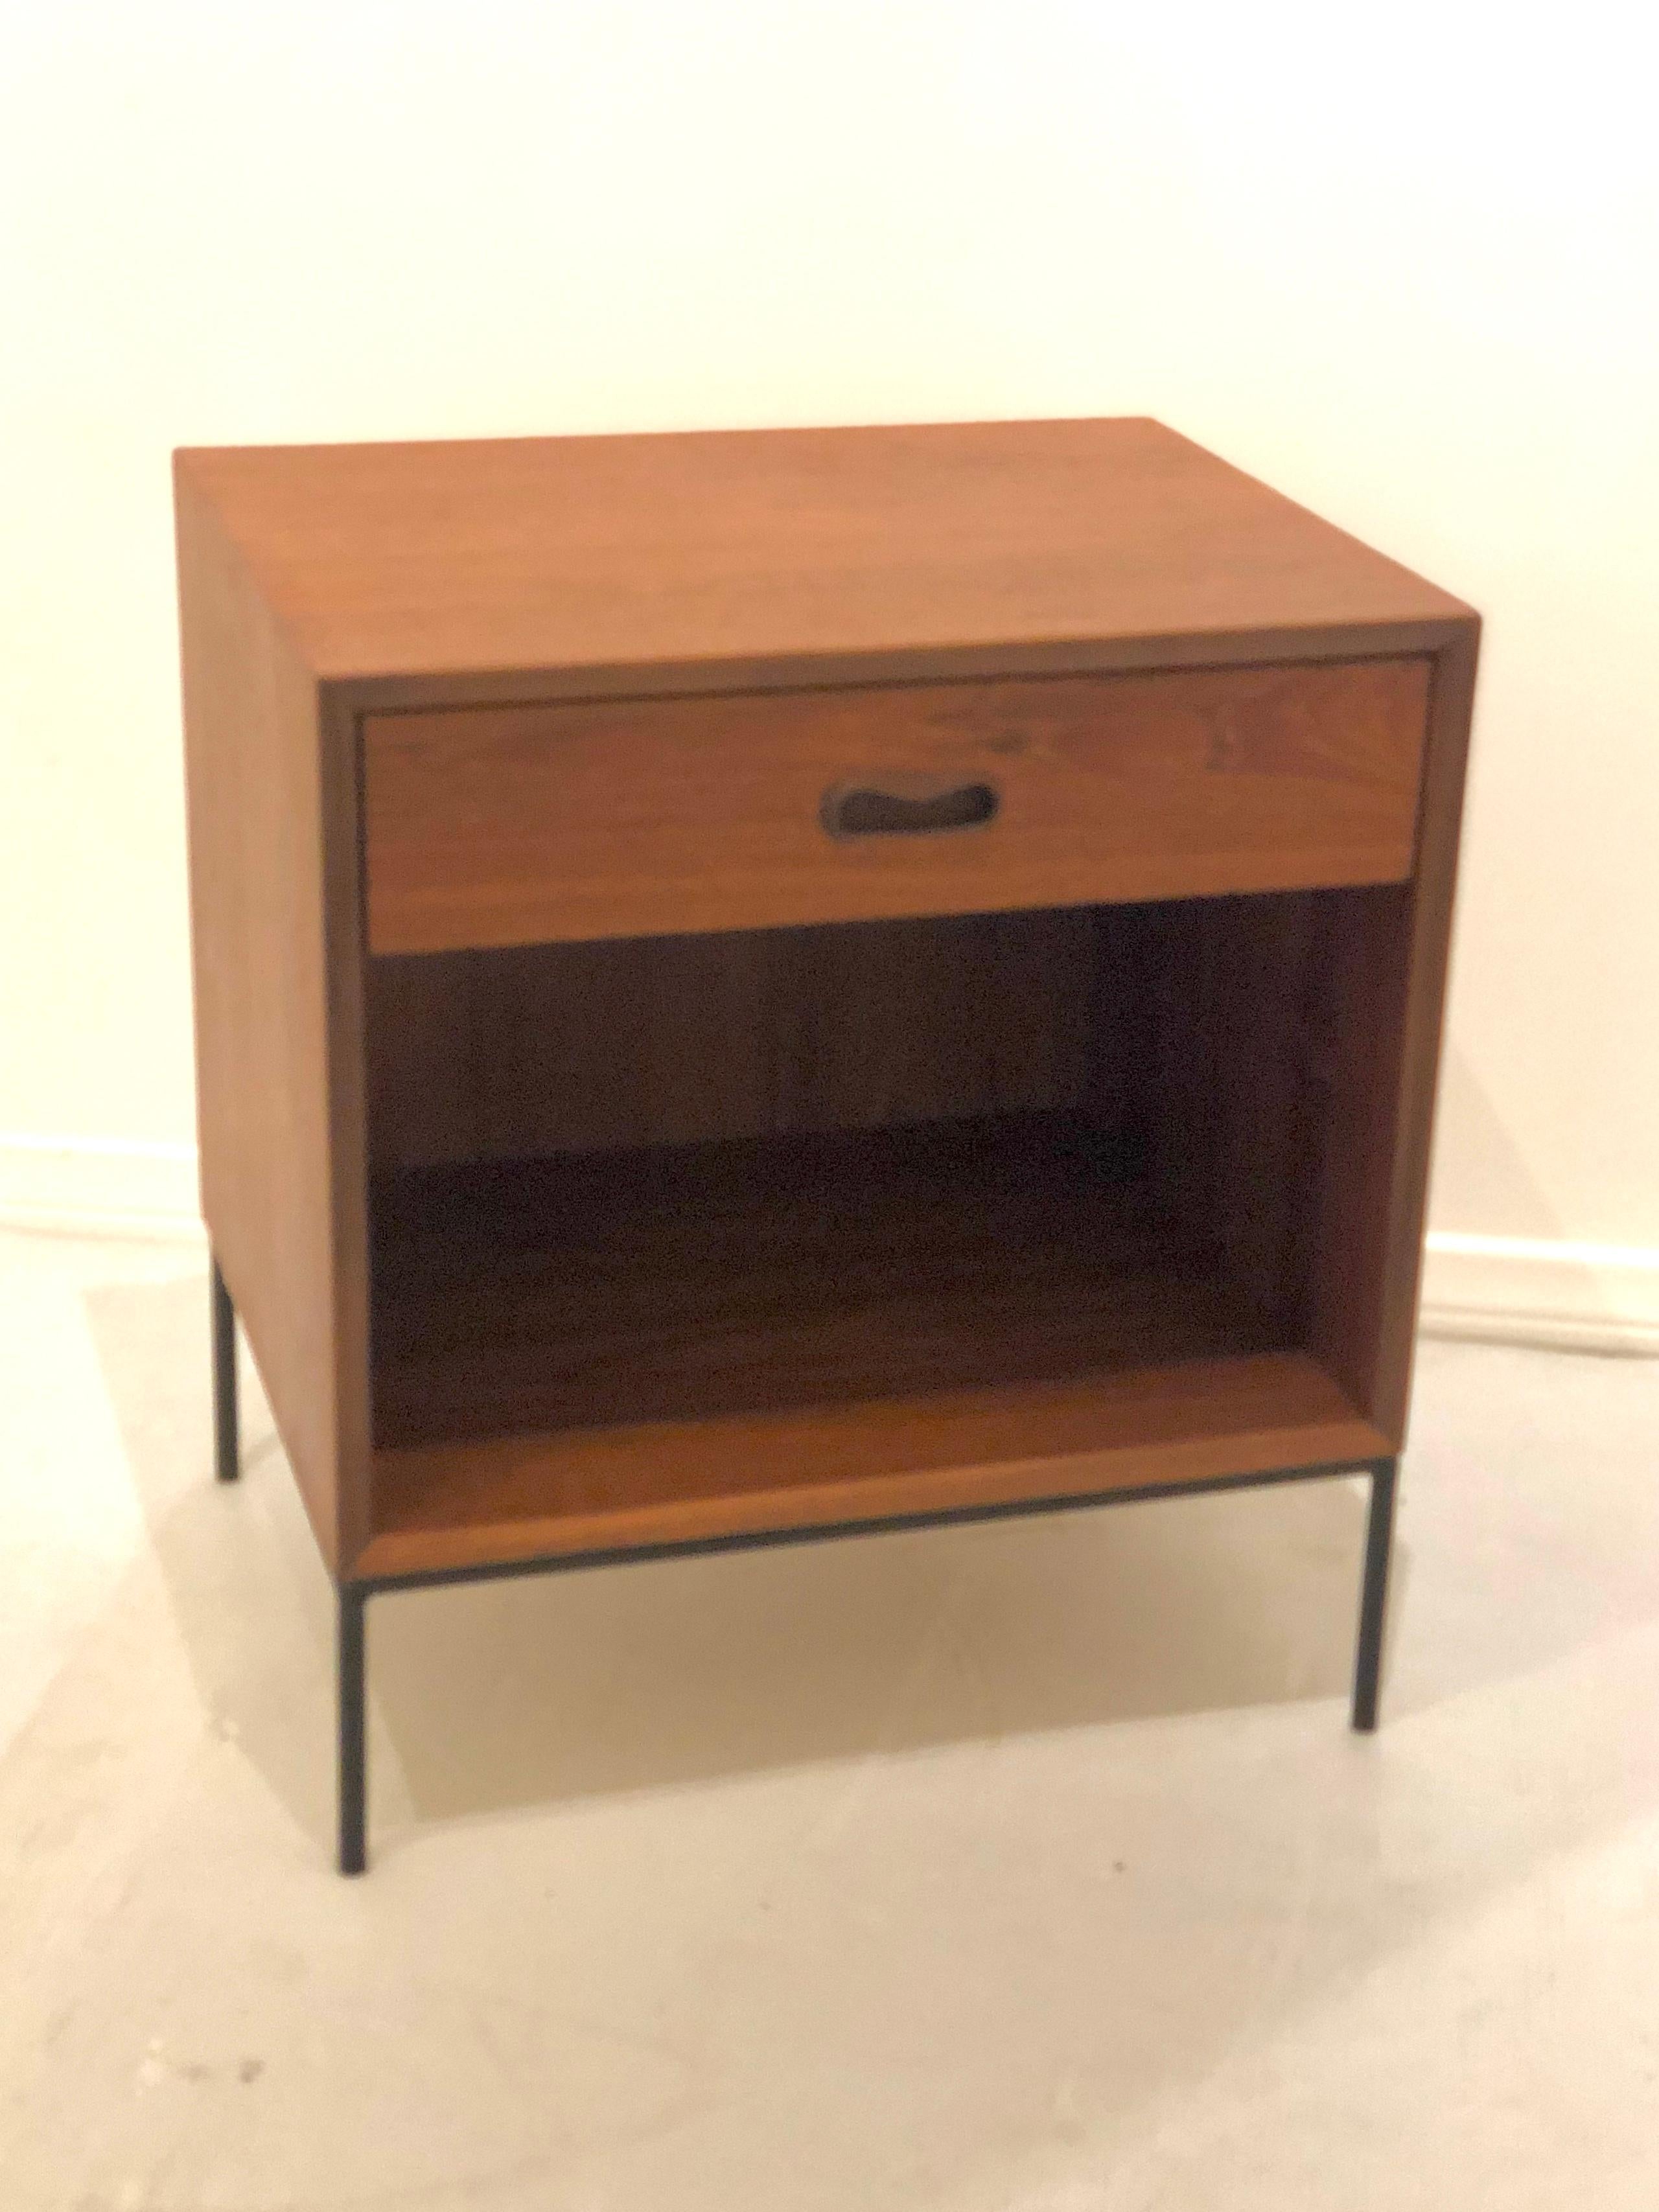 Beautiful single teak and solid iron nightstand, circa 1950s we refinished this piece and sprayed the iron base in black, its in nice condition with a small repair on the top right corner as shown, nothing major but needs to be mentioned.